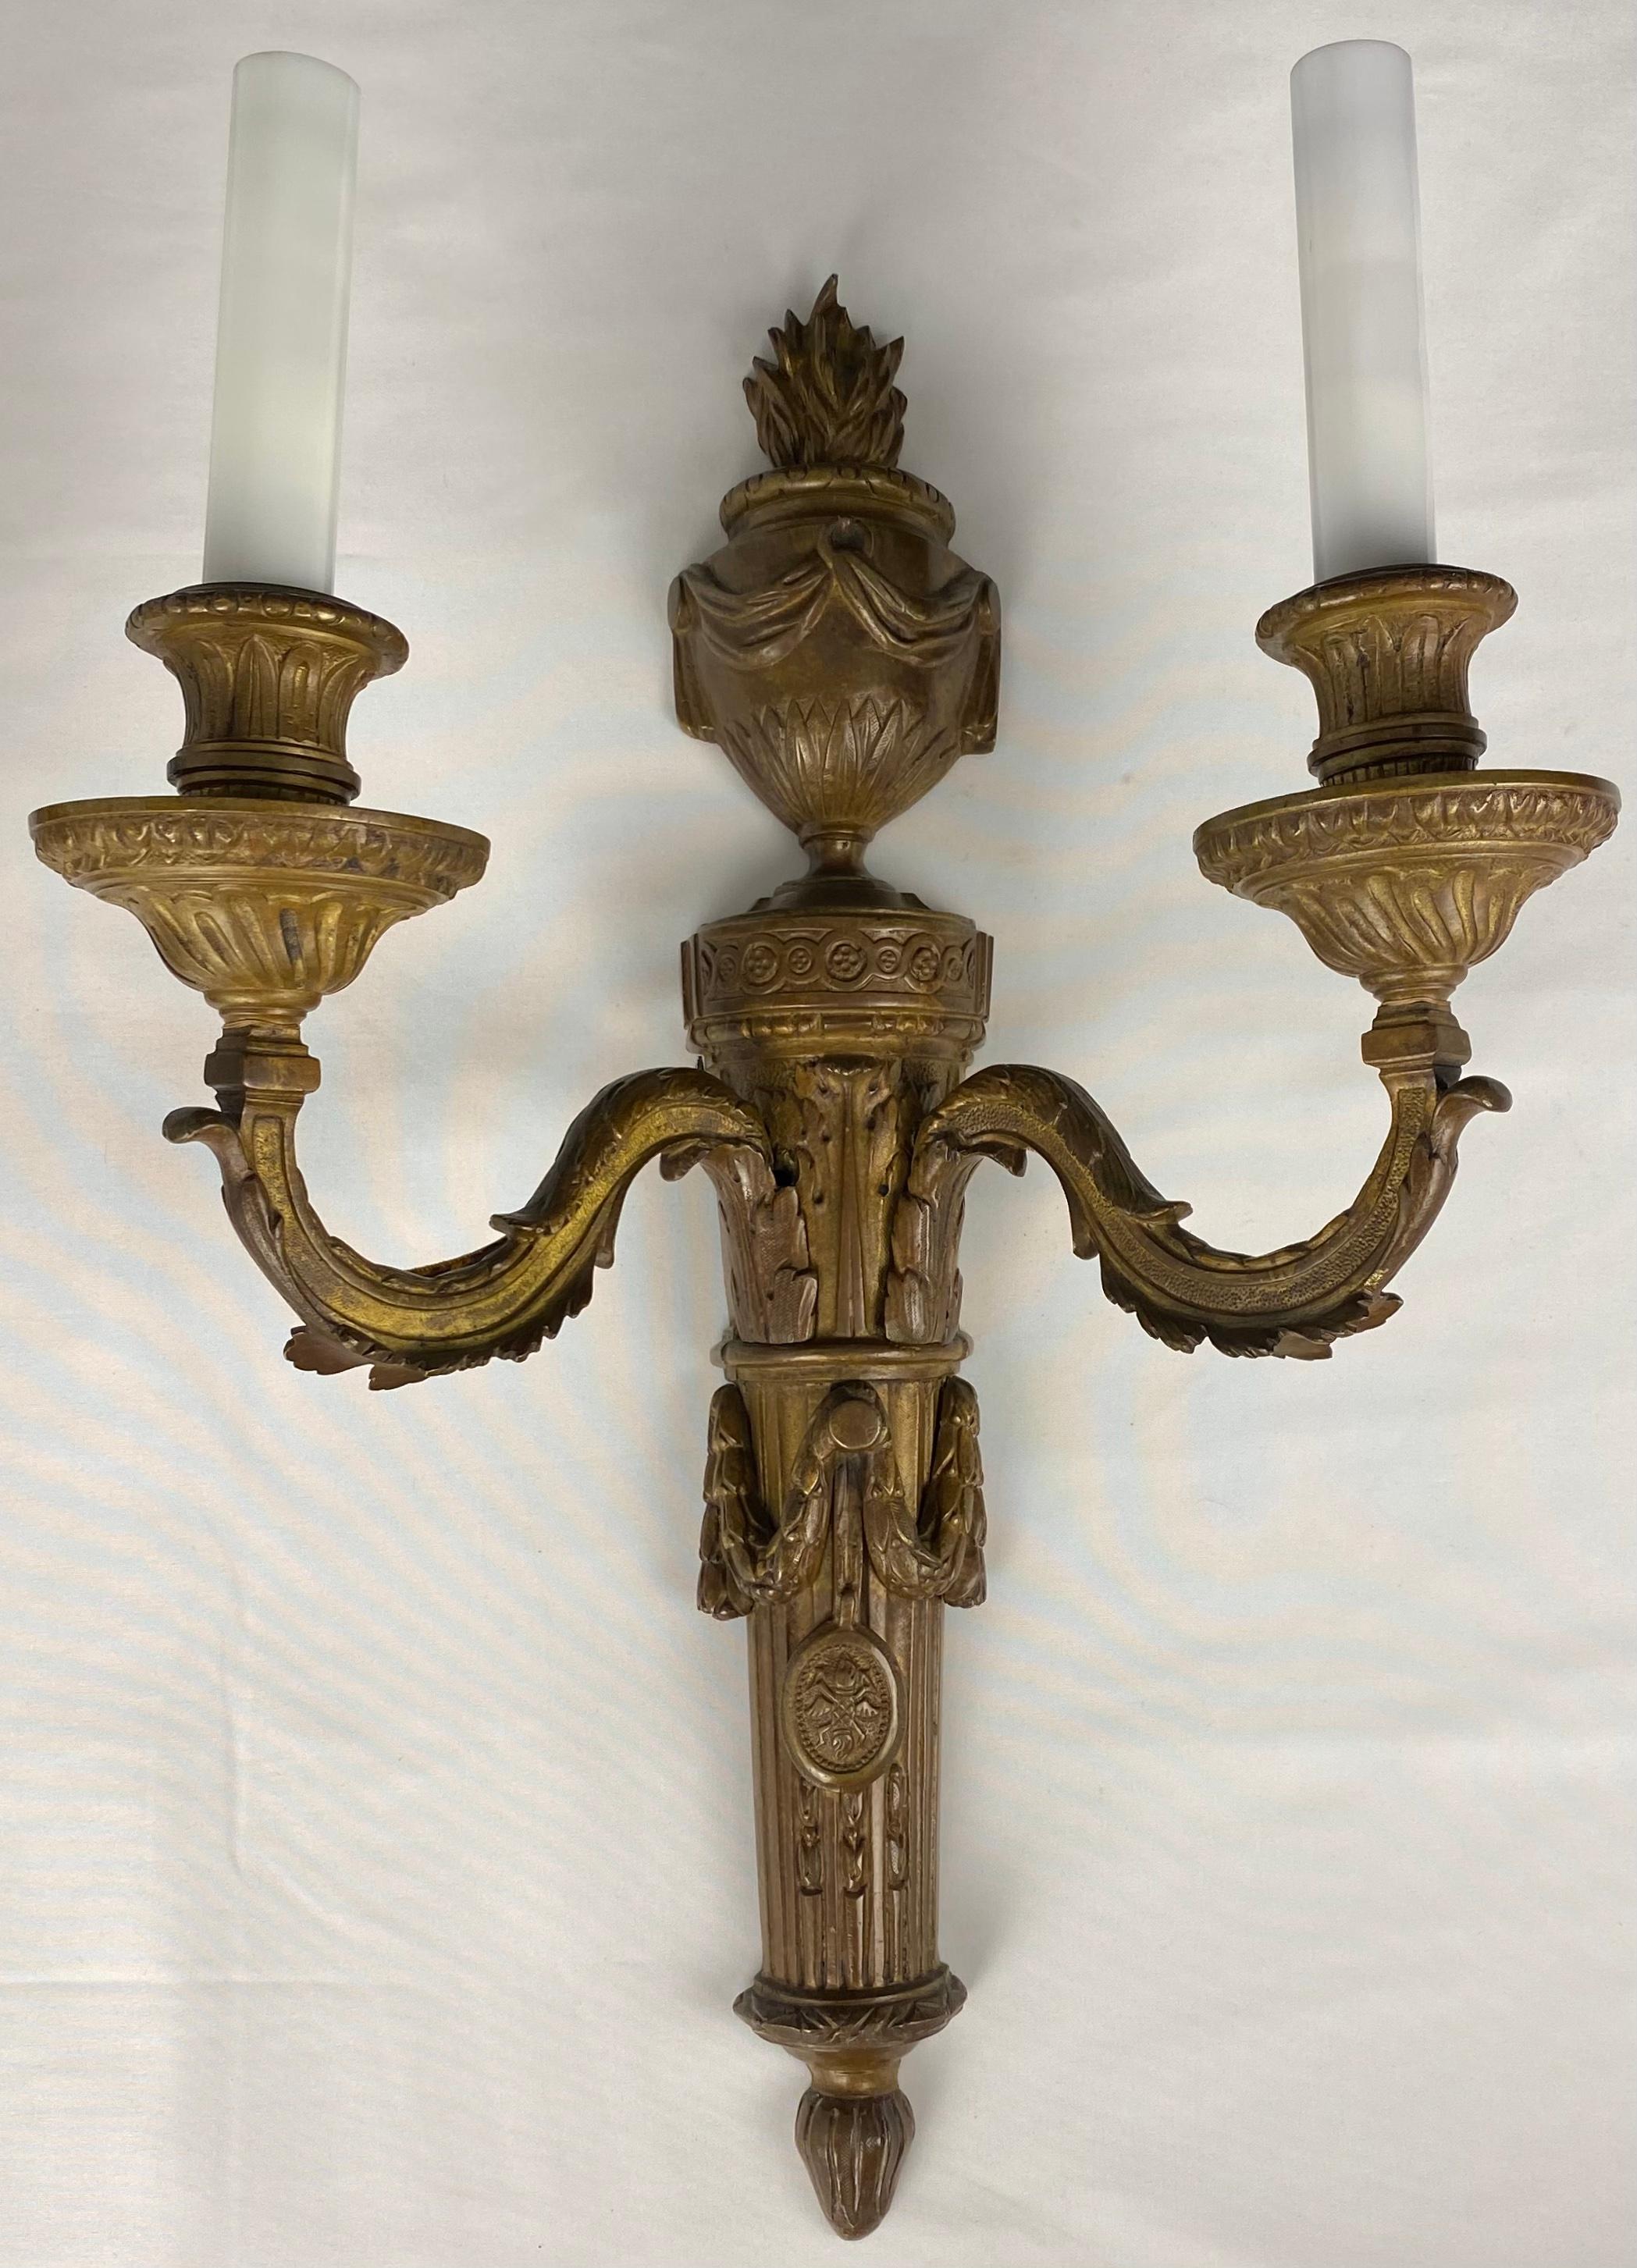 A fine quality pair of French late 18th century Louis XVI gilt bronze sconces. The two S scrolled arms have been electrified, details include a flamed torch signifying strength and prosperity, tied with a ribbon. Above is a reeded urn design with a